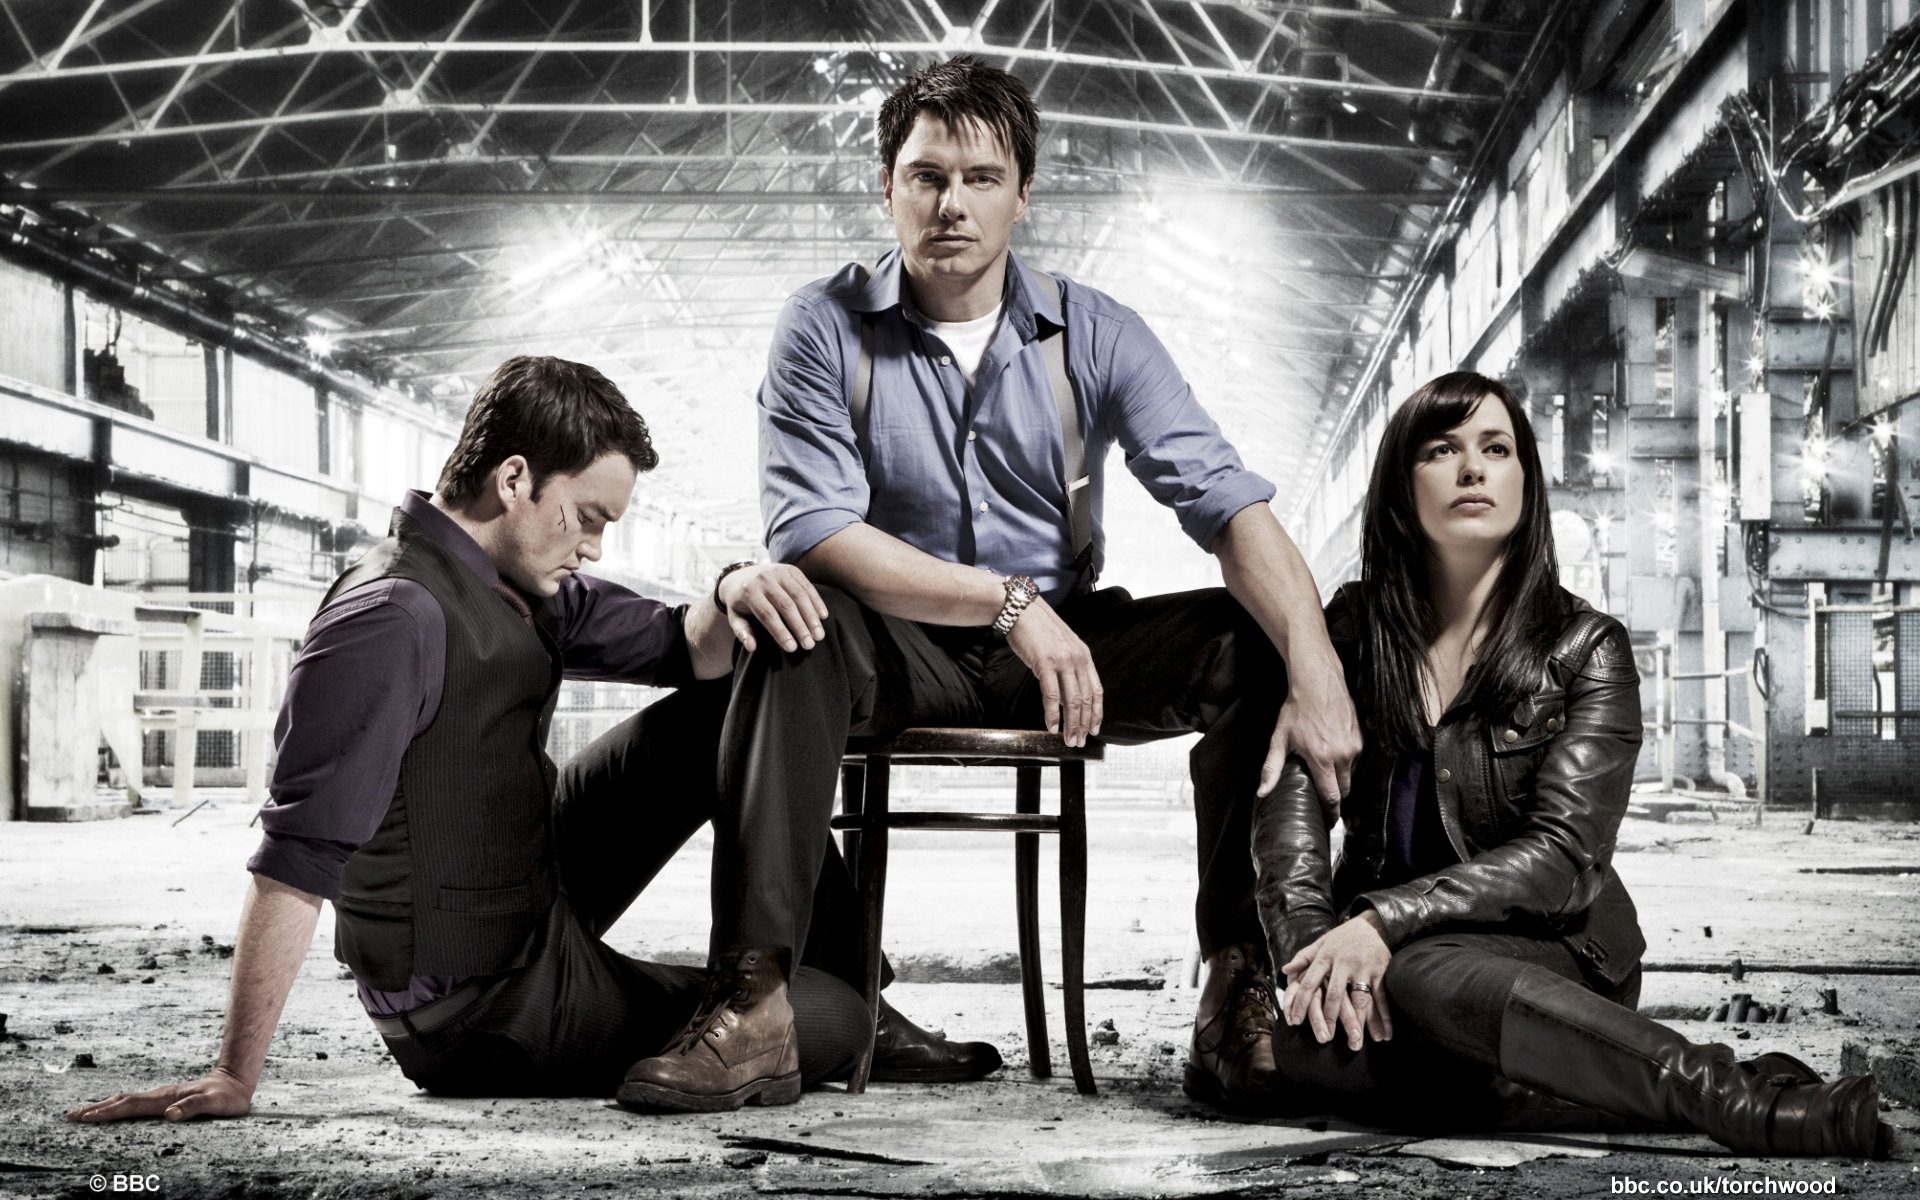 cast from Torchwood